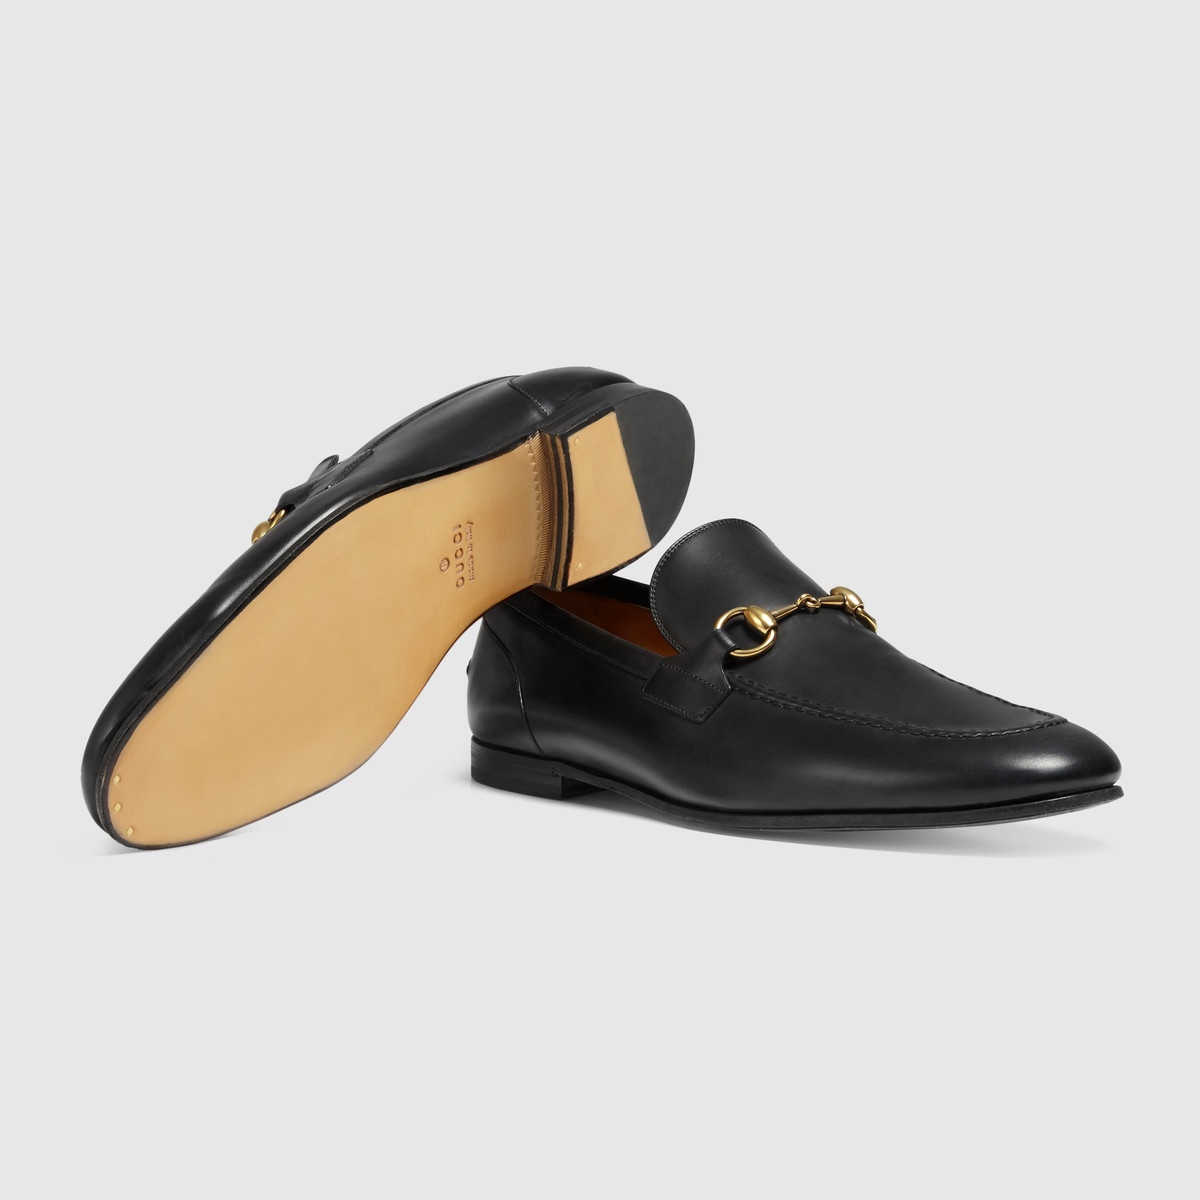 Gucci Jordaan leather loafer - 5